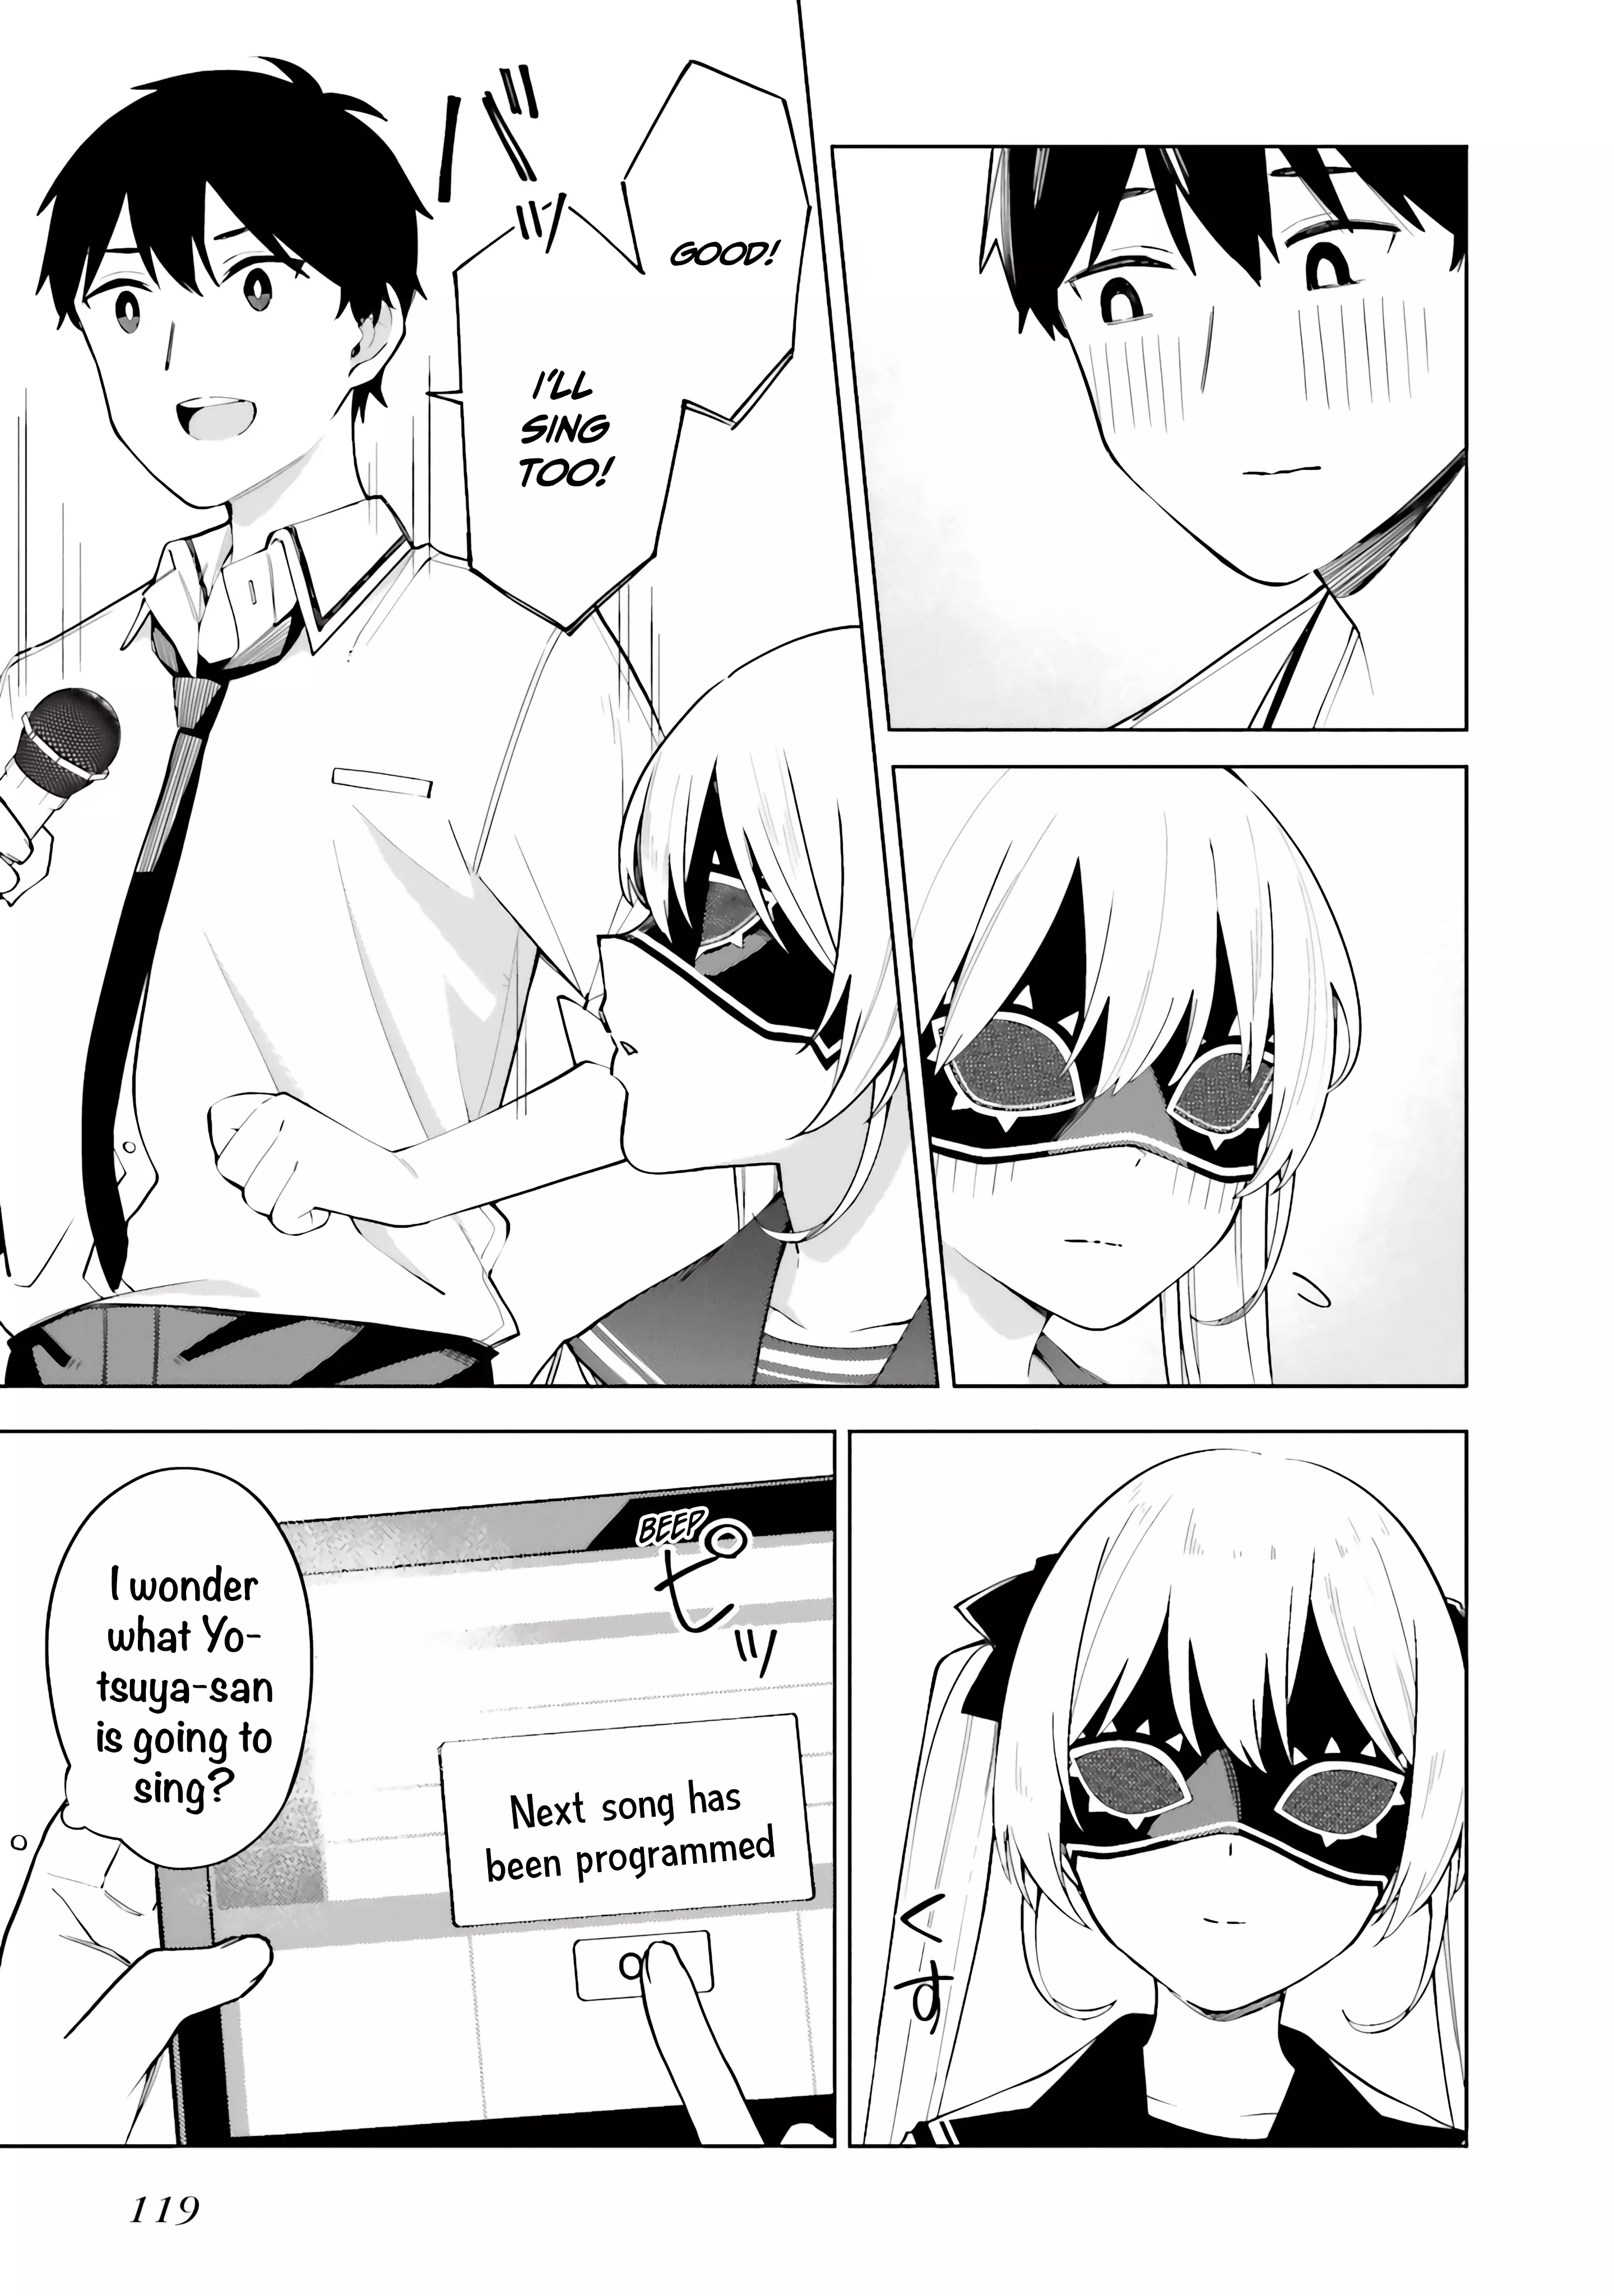 I Don't Understand Shirogane-San's Facial Expression At All - 16 page 28-f497e264